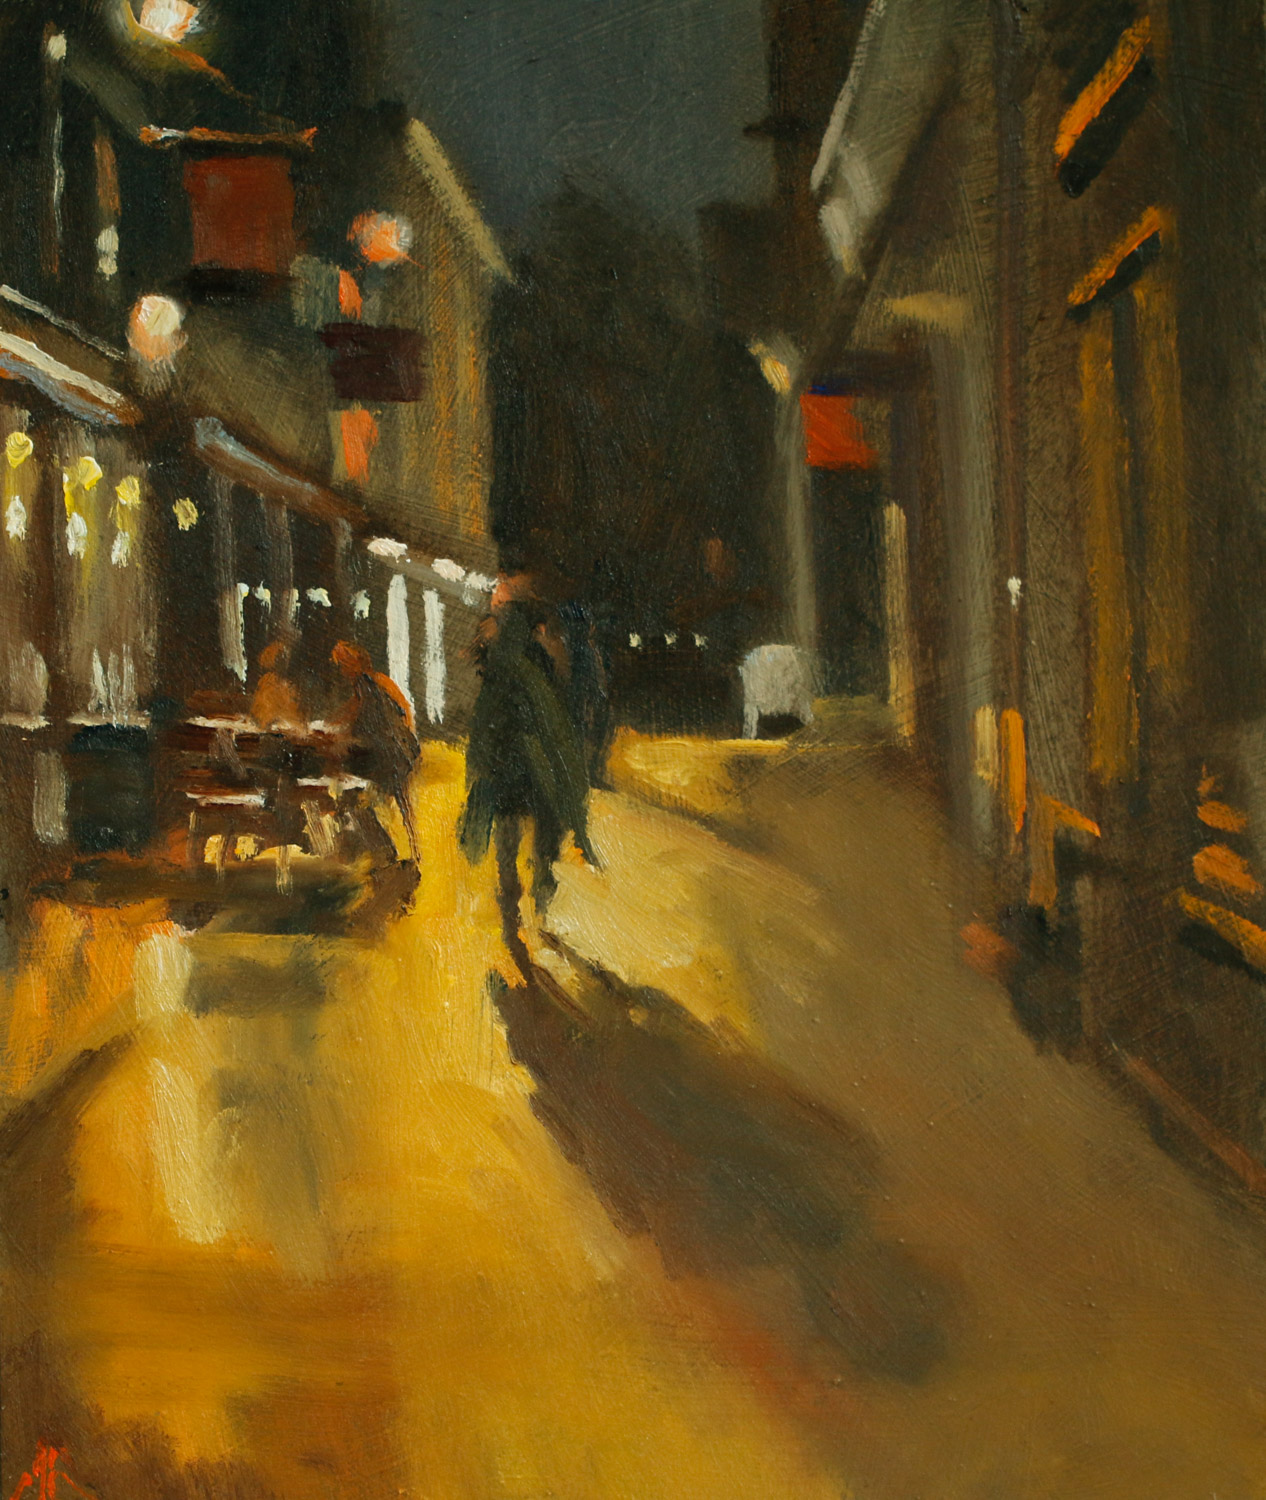 Artist Michael Richardson - Dove Street 12x10 Oil on Board at Paint Out Norwich 2015